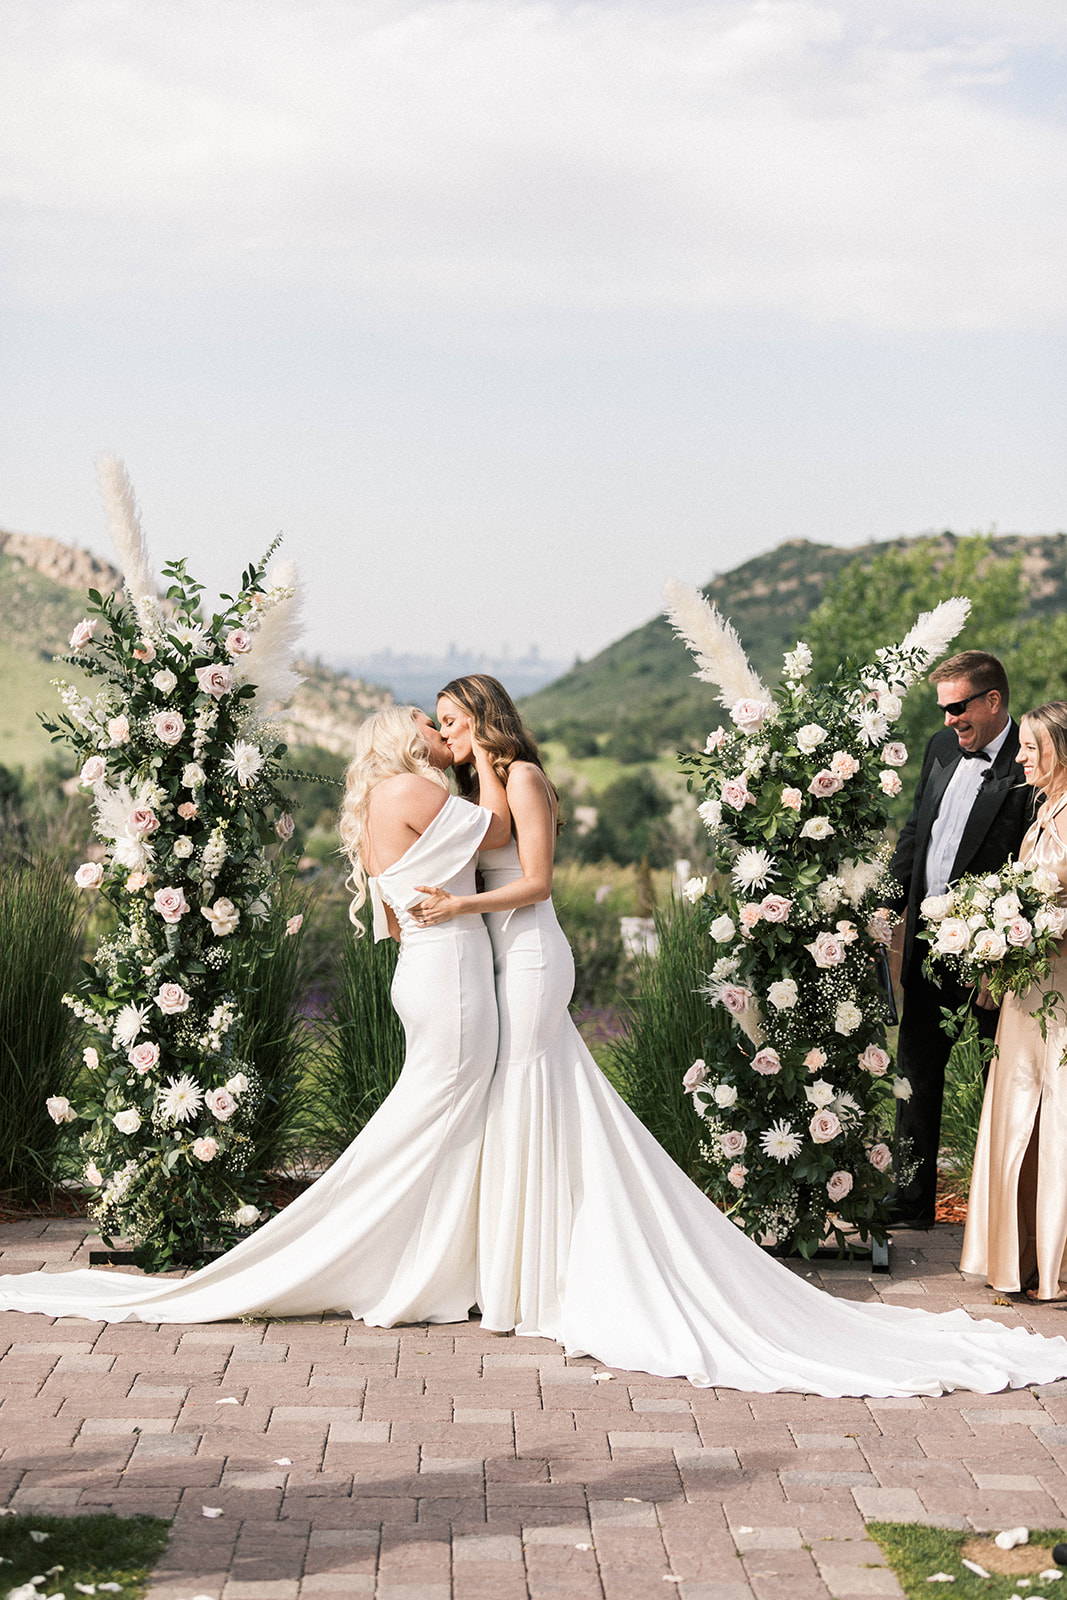 Brides sharing a kiss in front of white floral arbor